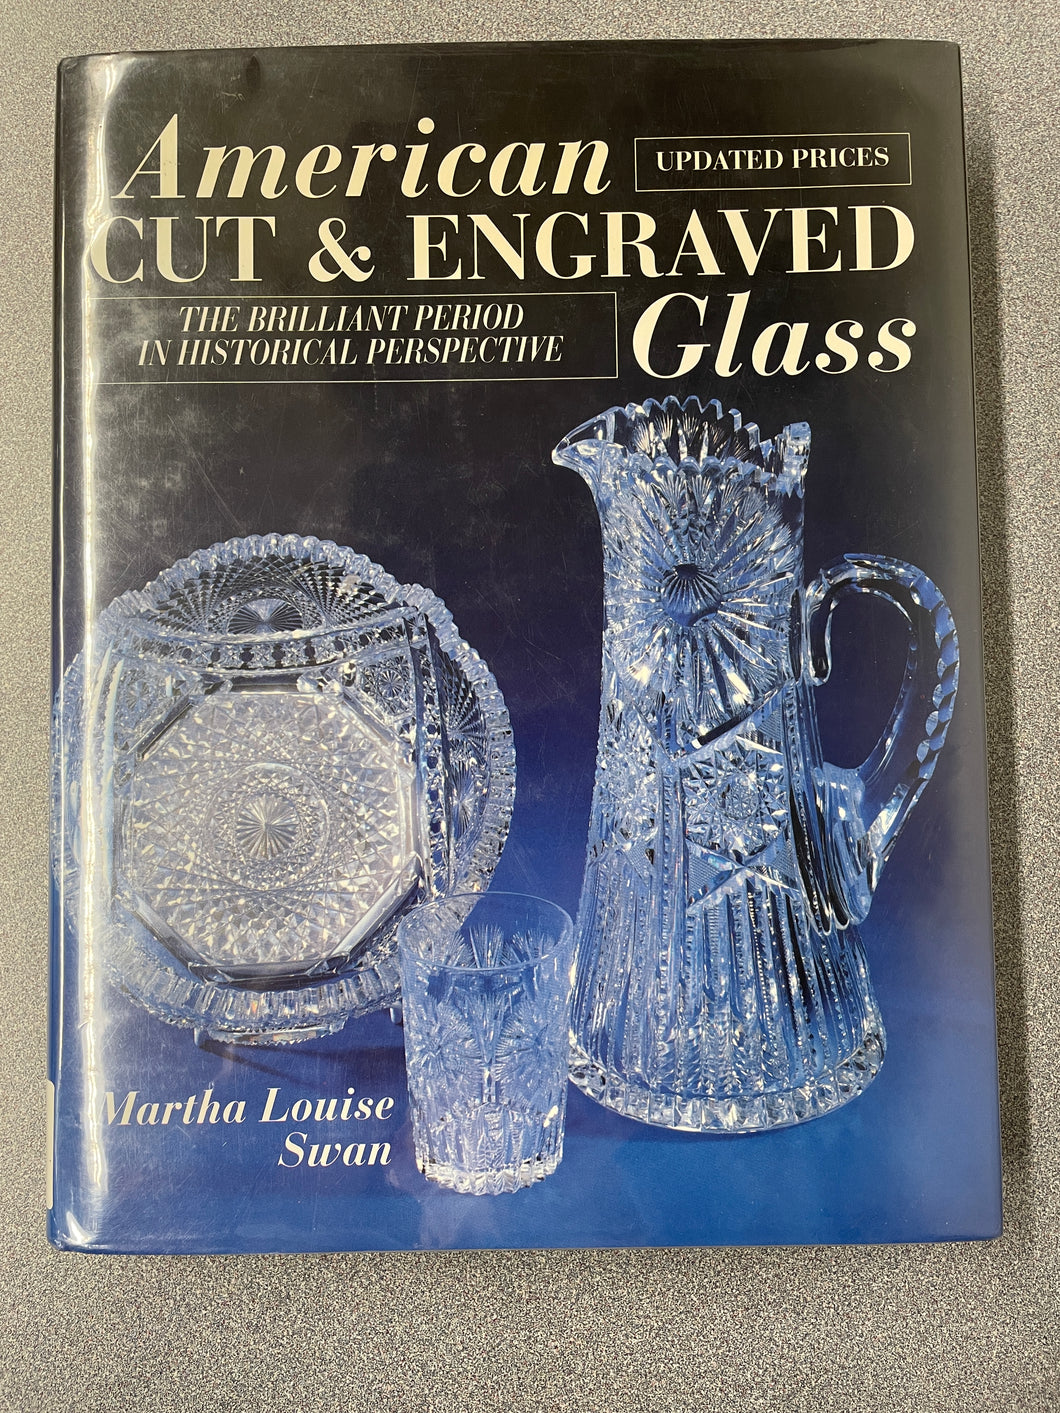 American Cut and Engraved Glass: The Brilliant Period in Historical Perspective, Updated Prices, Swan, Martha Louise [1994] VA 11/23